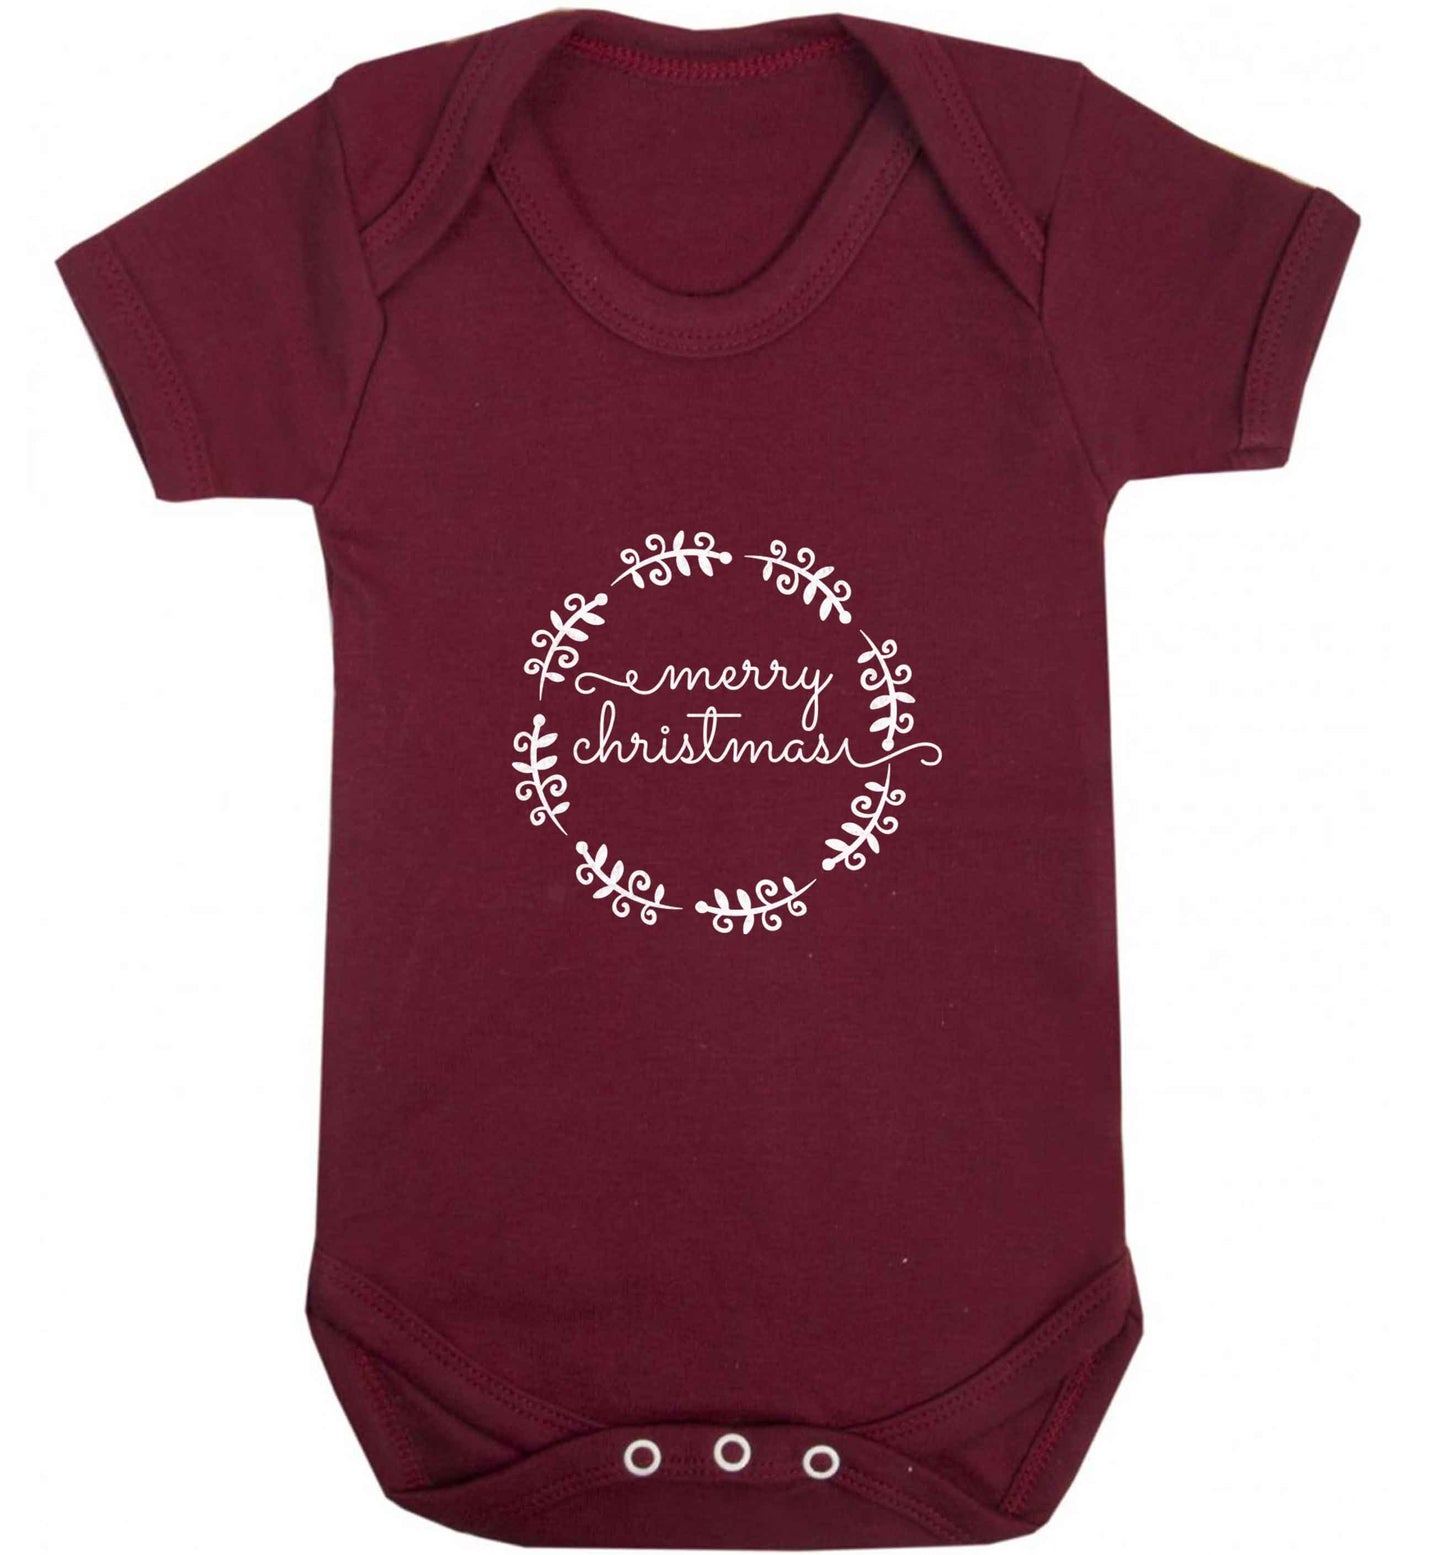 Merry christmas baby vest maroon 18-24 months